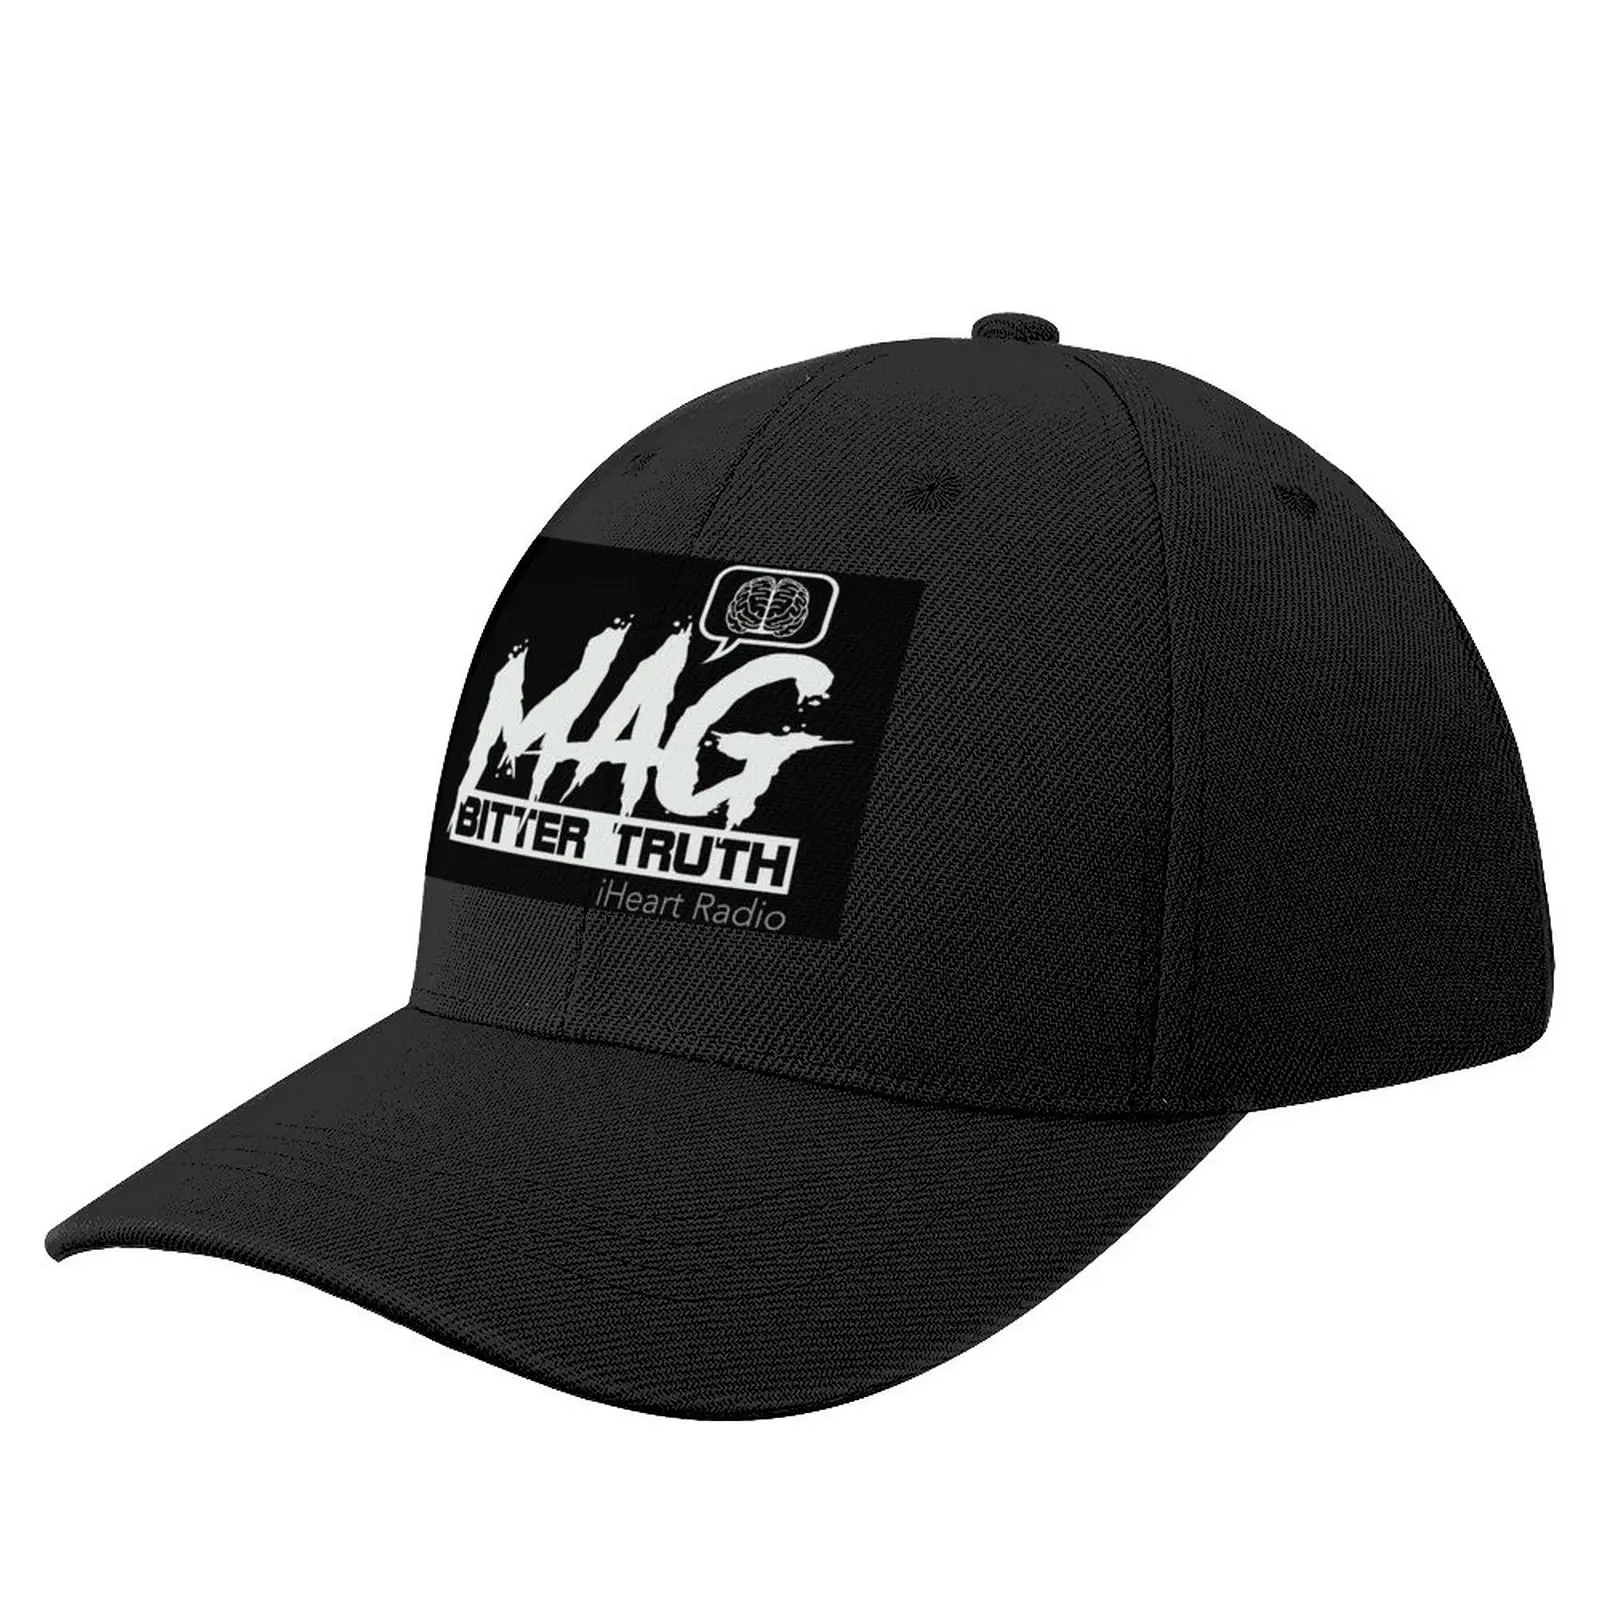 

MAG BITTER TRUTH iHeart Radio 2 Baseball Cap party hats New In Hat Rugby Women's Cap Men's